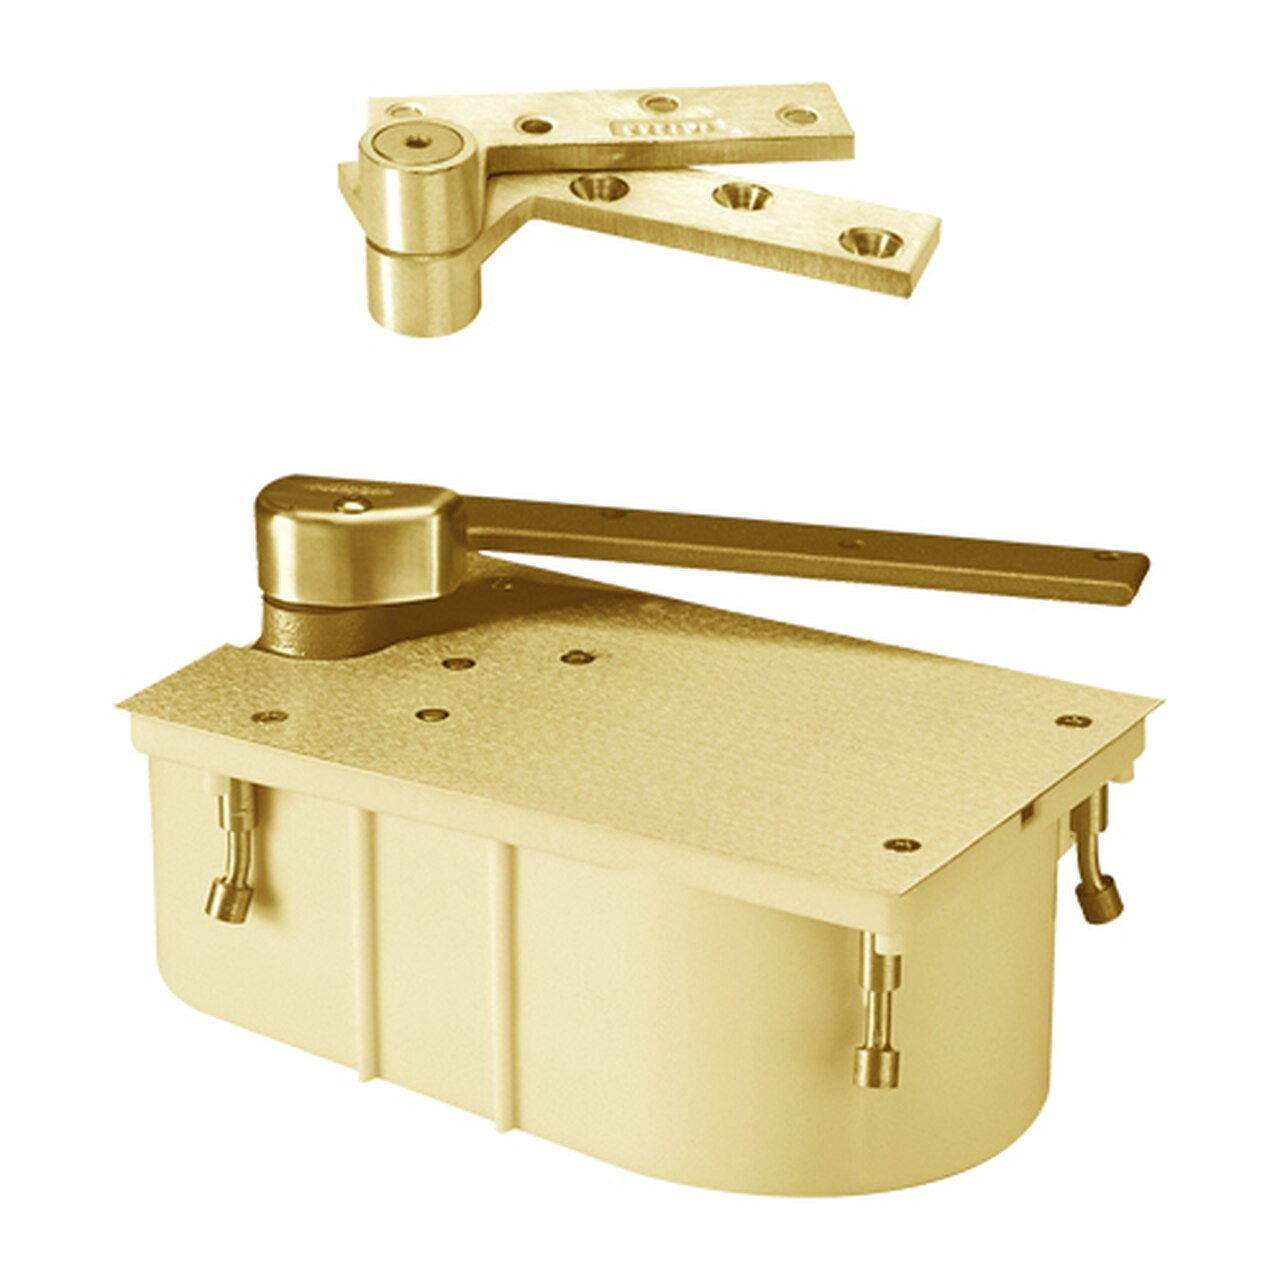 F27-85N-LTP-LH-605 Rixson 27 Series Fire Rated Heavy Duty 3/4" Offset Hung Floor Closer in Bright Brass Finish